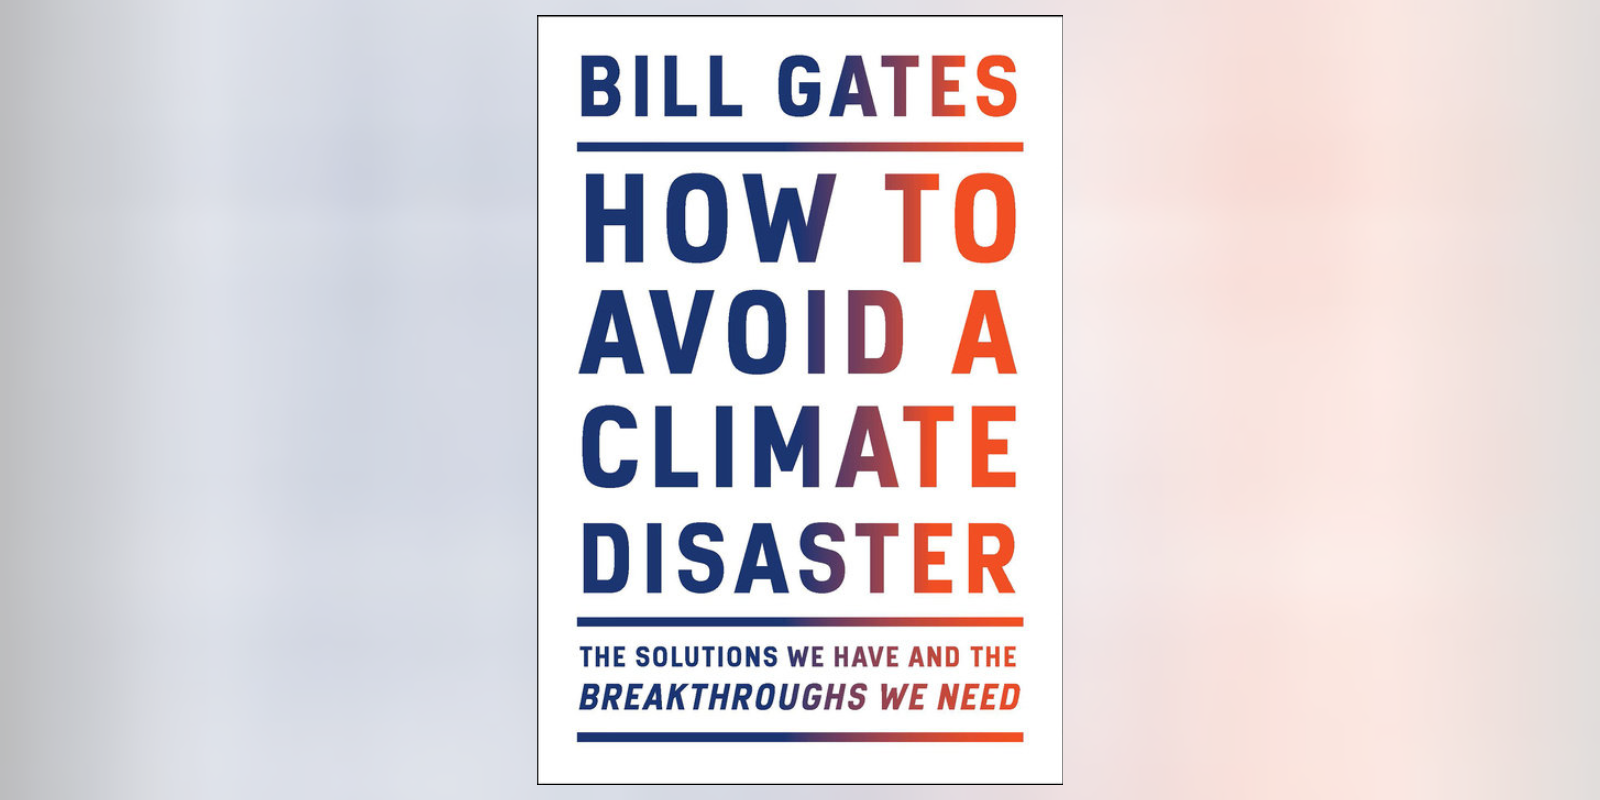 Bill Gates provides a guide to fight climate change